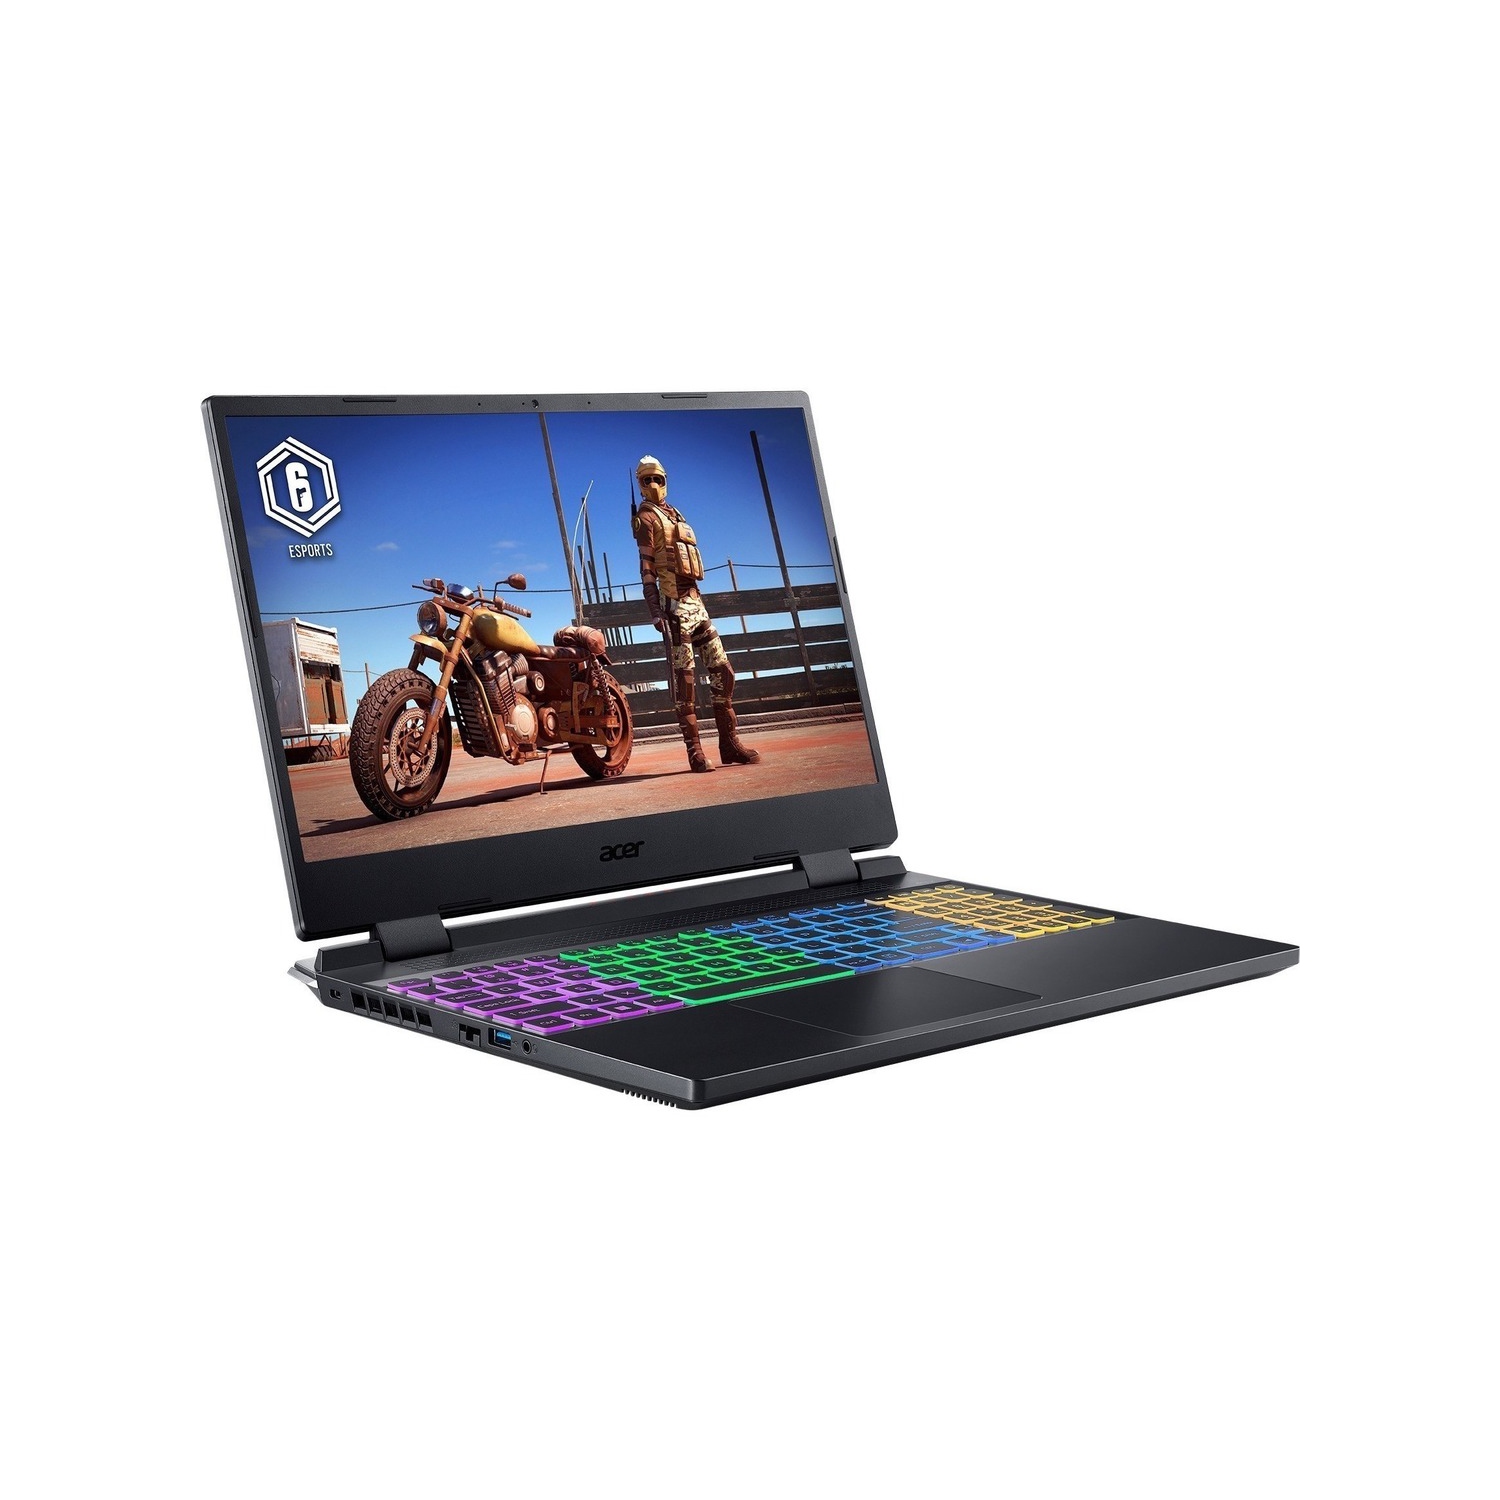 Acer Nitro 5 AN515-58 AN515-58-52E8 15.6" Gaming Notebook - Full HD - 1920 x 1080 - Intel Core i5 12th Gen i5-12500H Dodeca-core (12 Core) 2.50 GHz - 8 GB Total RAM - 512 GB SSD -